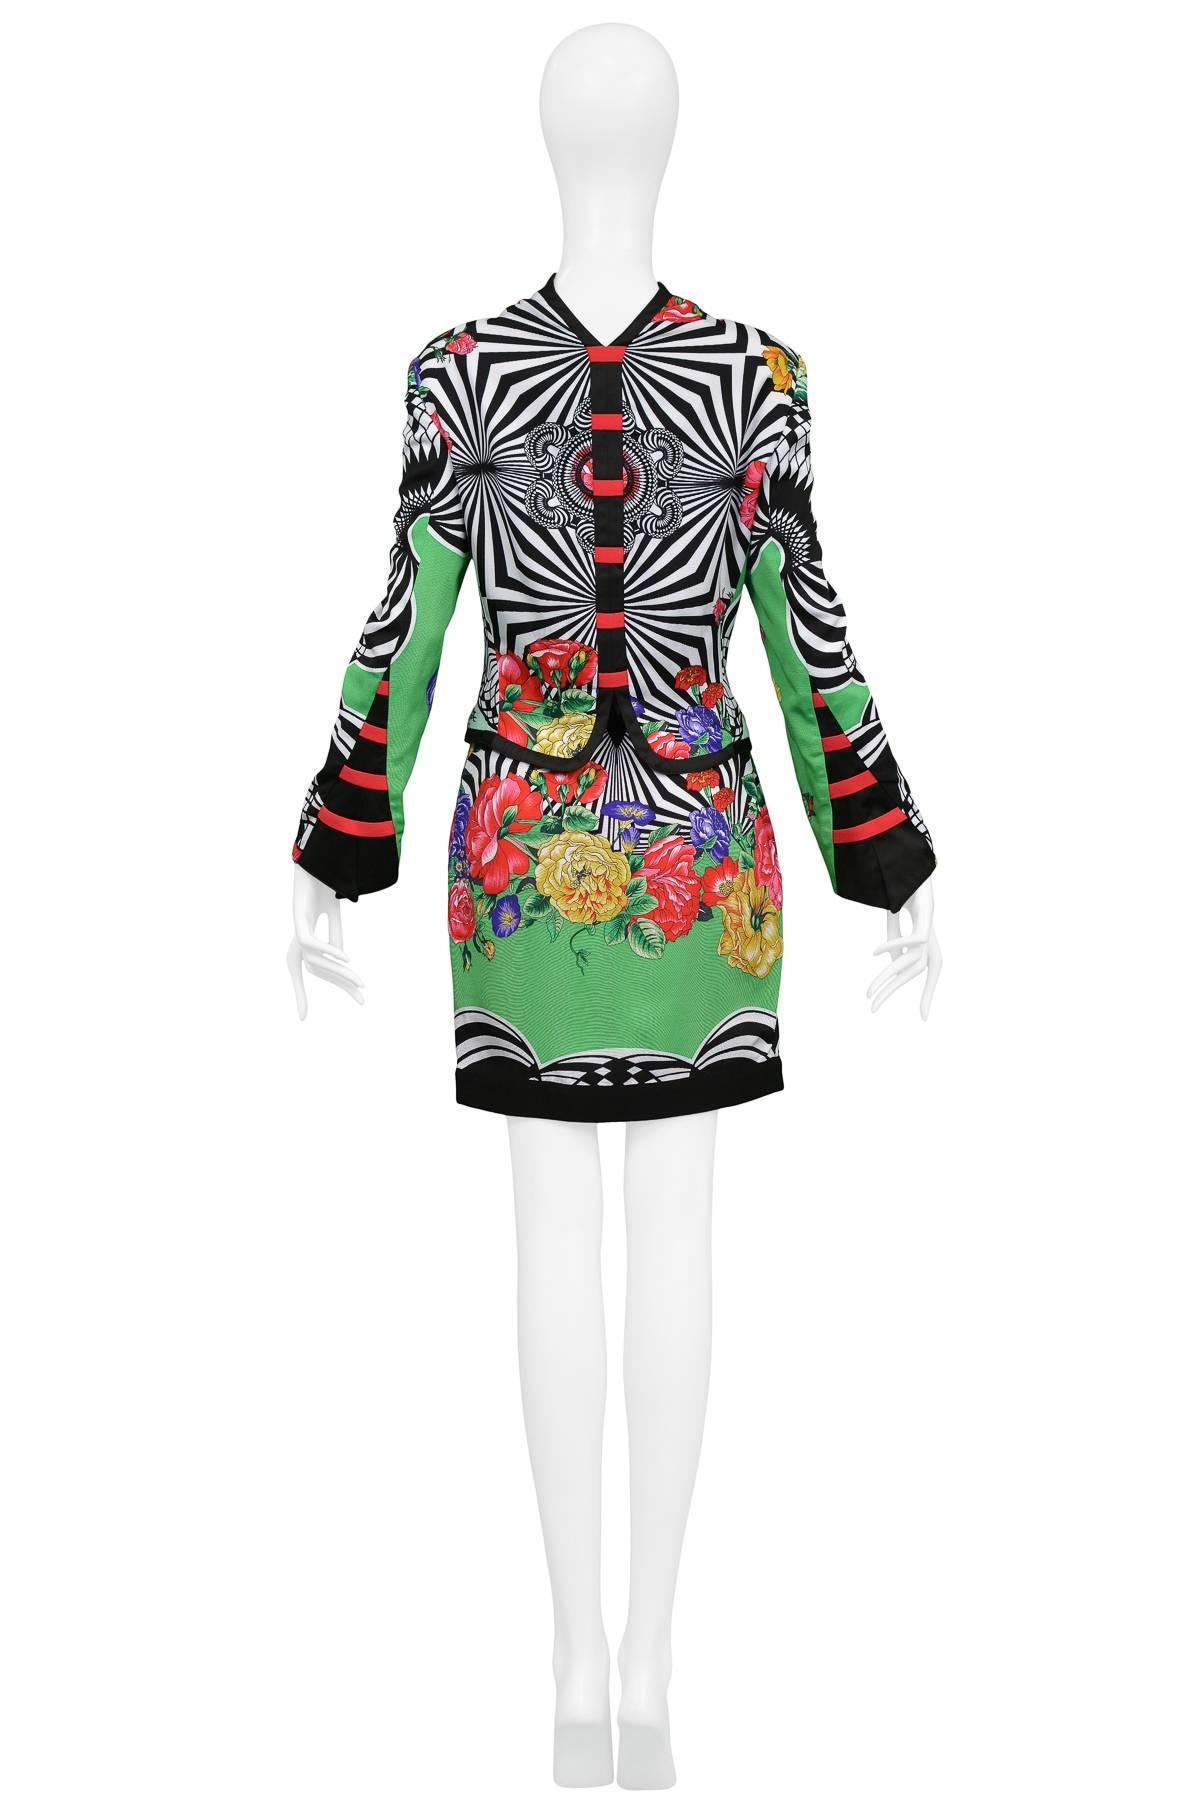 Versace 2 Op Art Floral Skirt Ensemble, 1992 In Excellent Condition For Sale In Los Angeles, CA